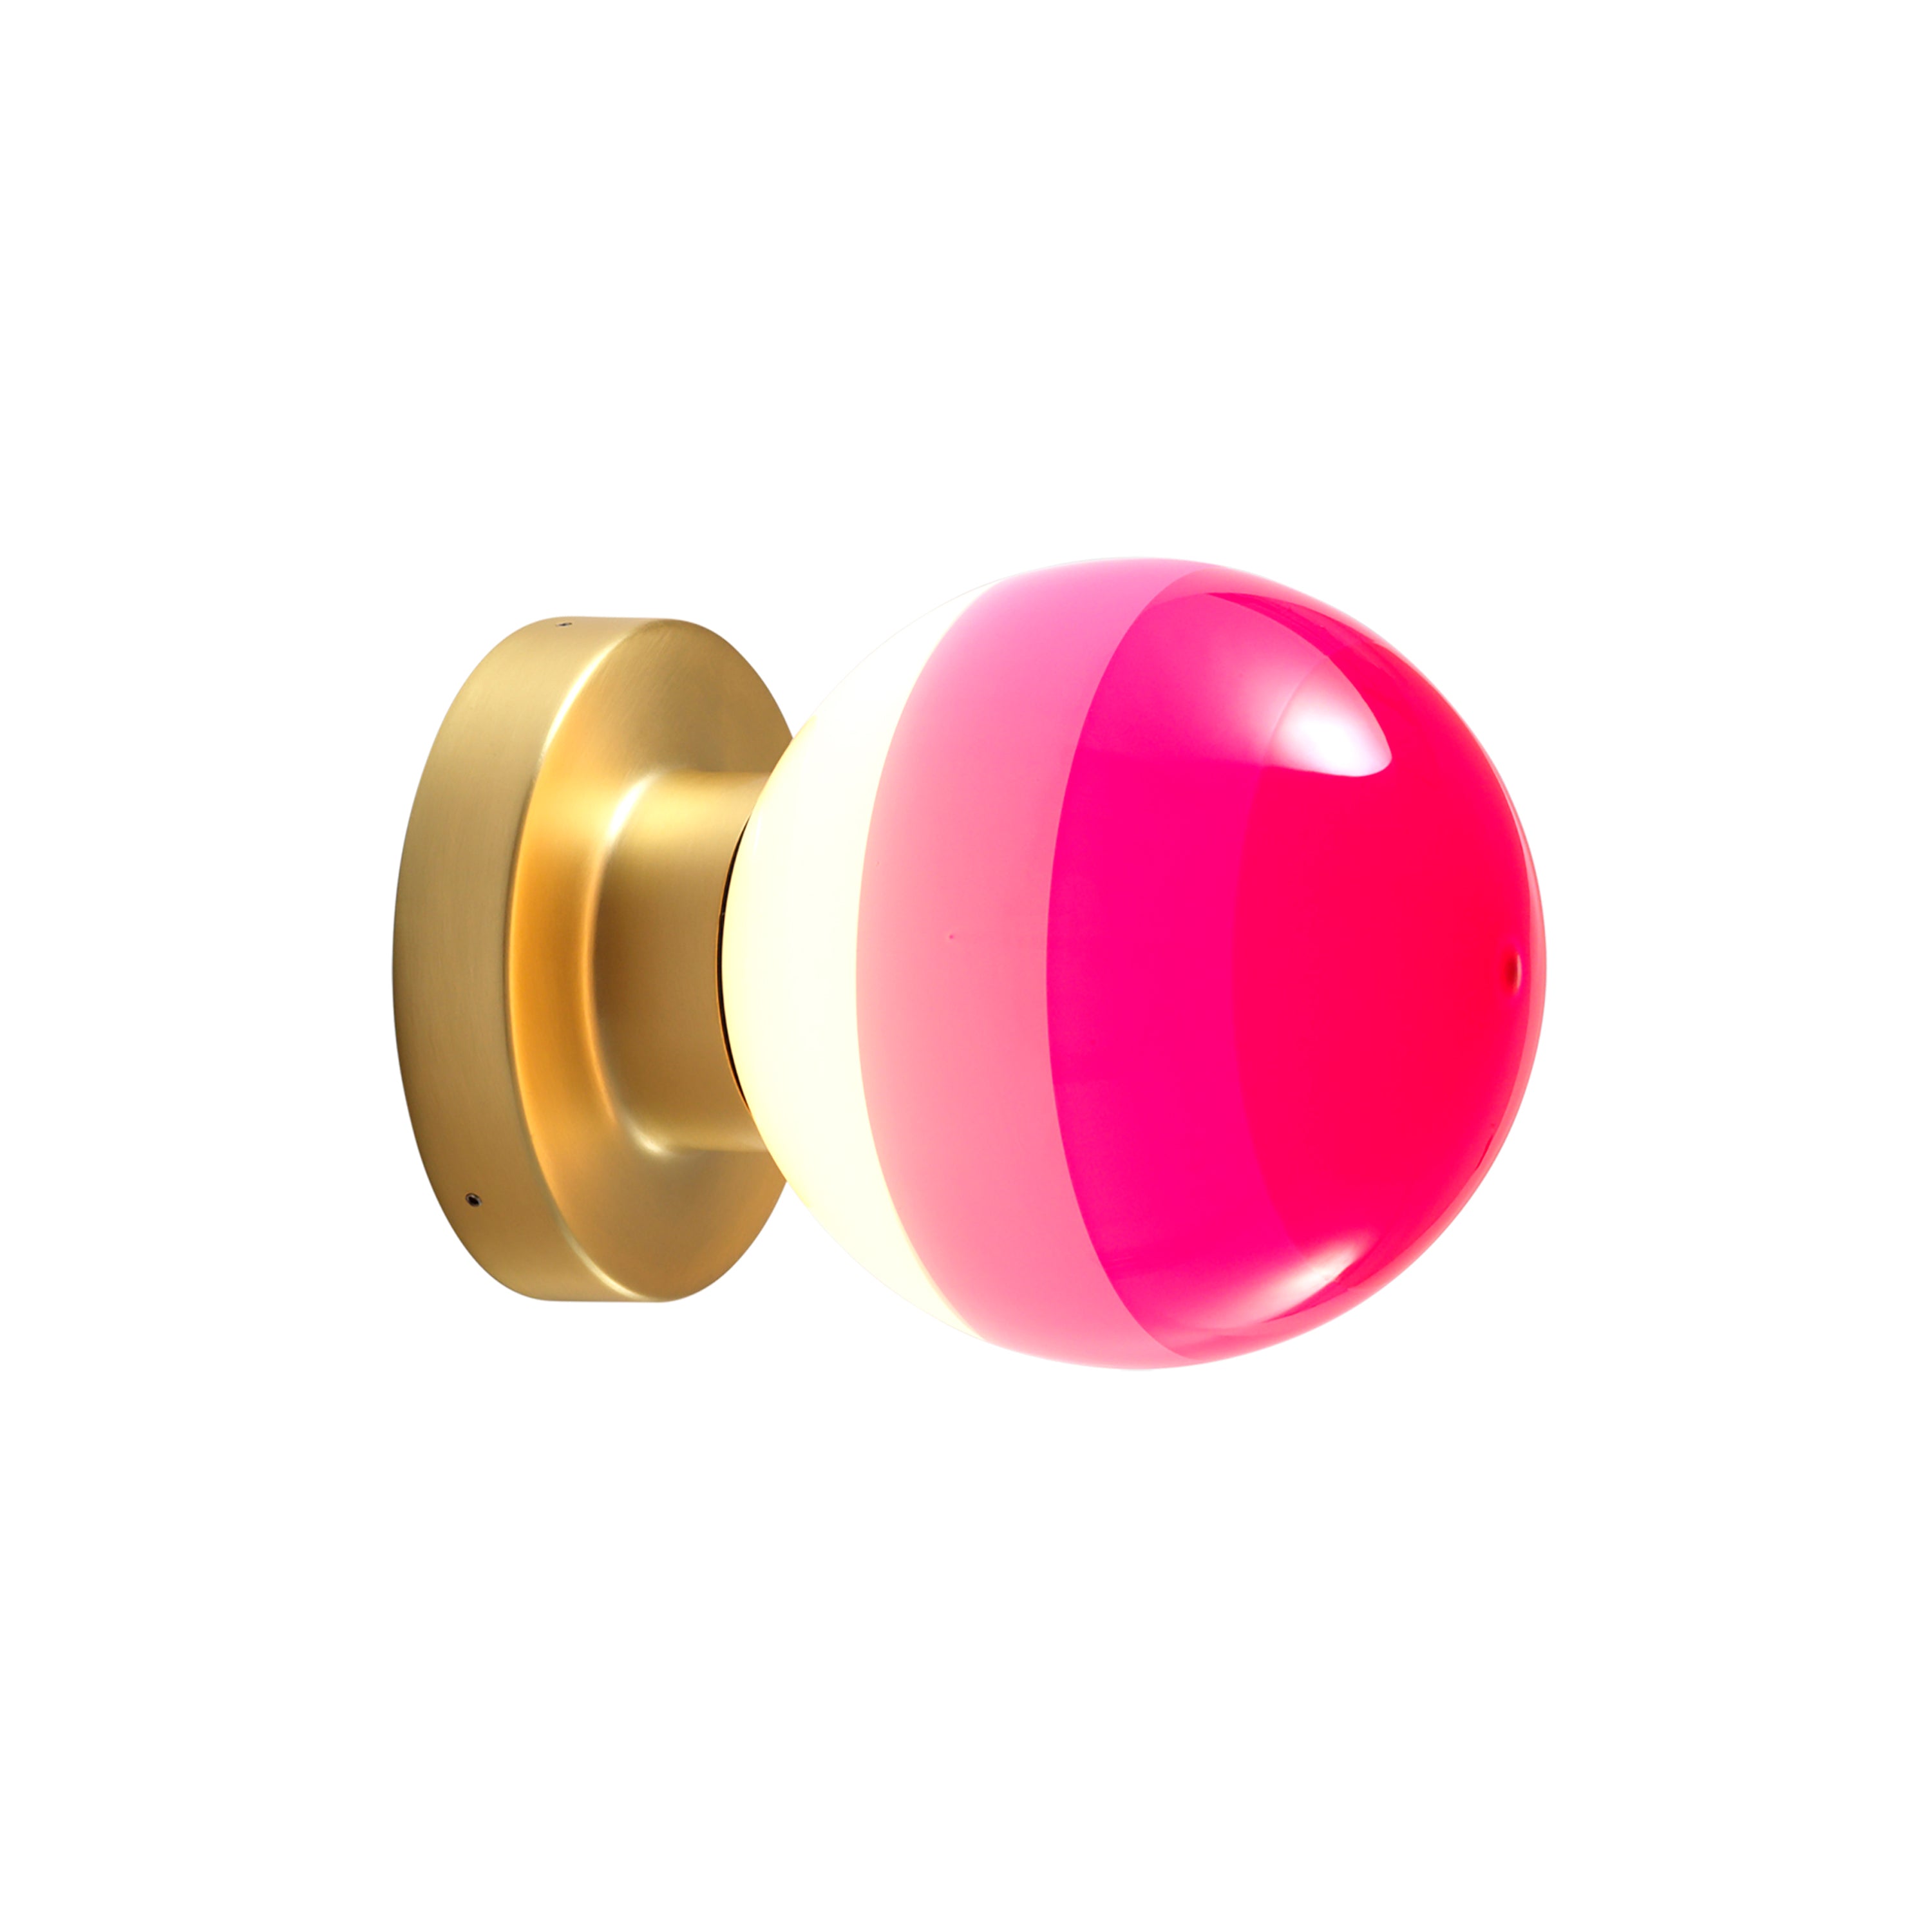 Dipping Wall Light: A2-13 + Brushed Brass + Pink